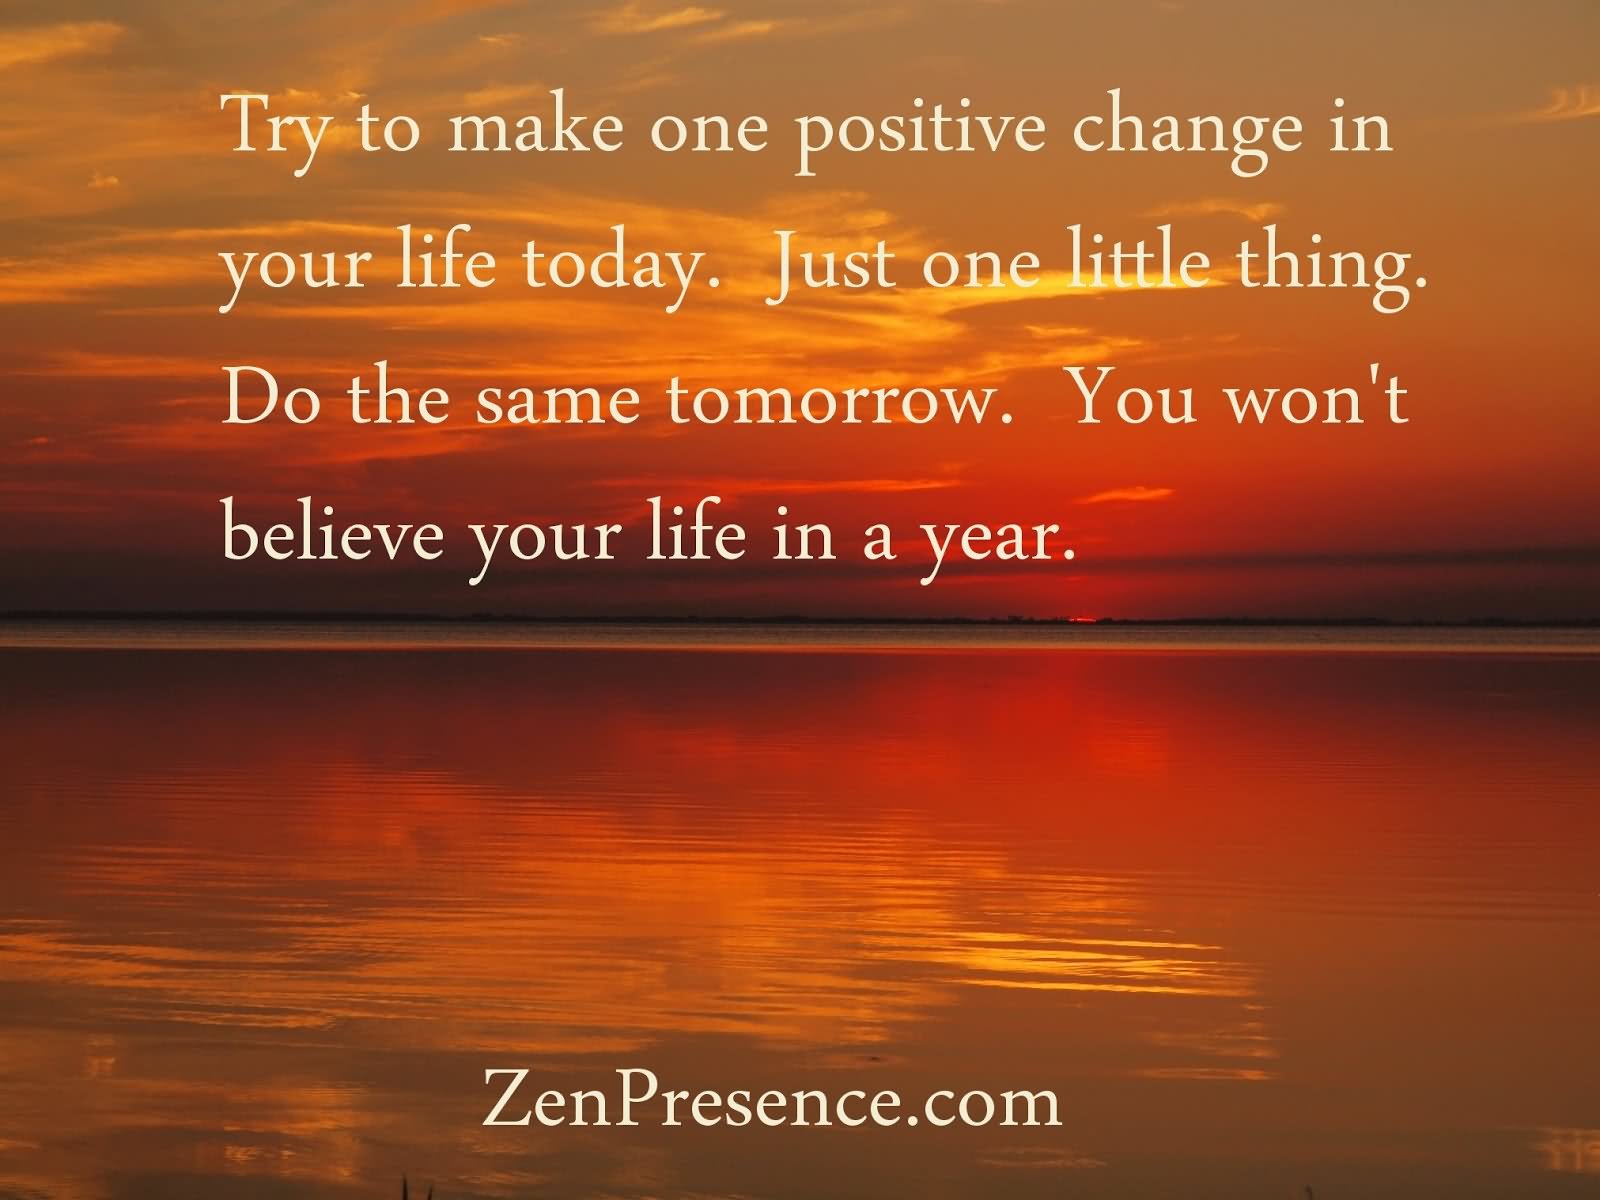 Try to make one positive change in your life today just one little thing do the same tomorrow you won't believe your life in a year